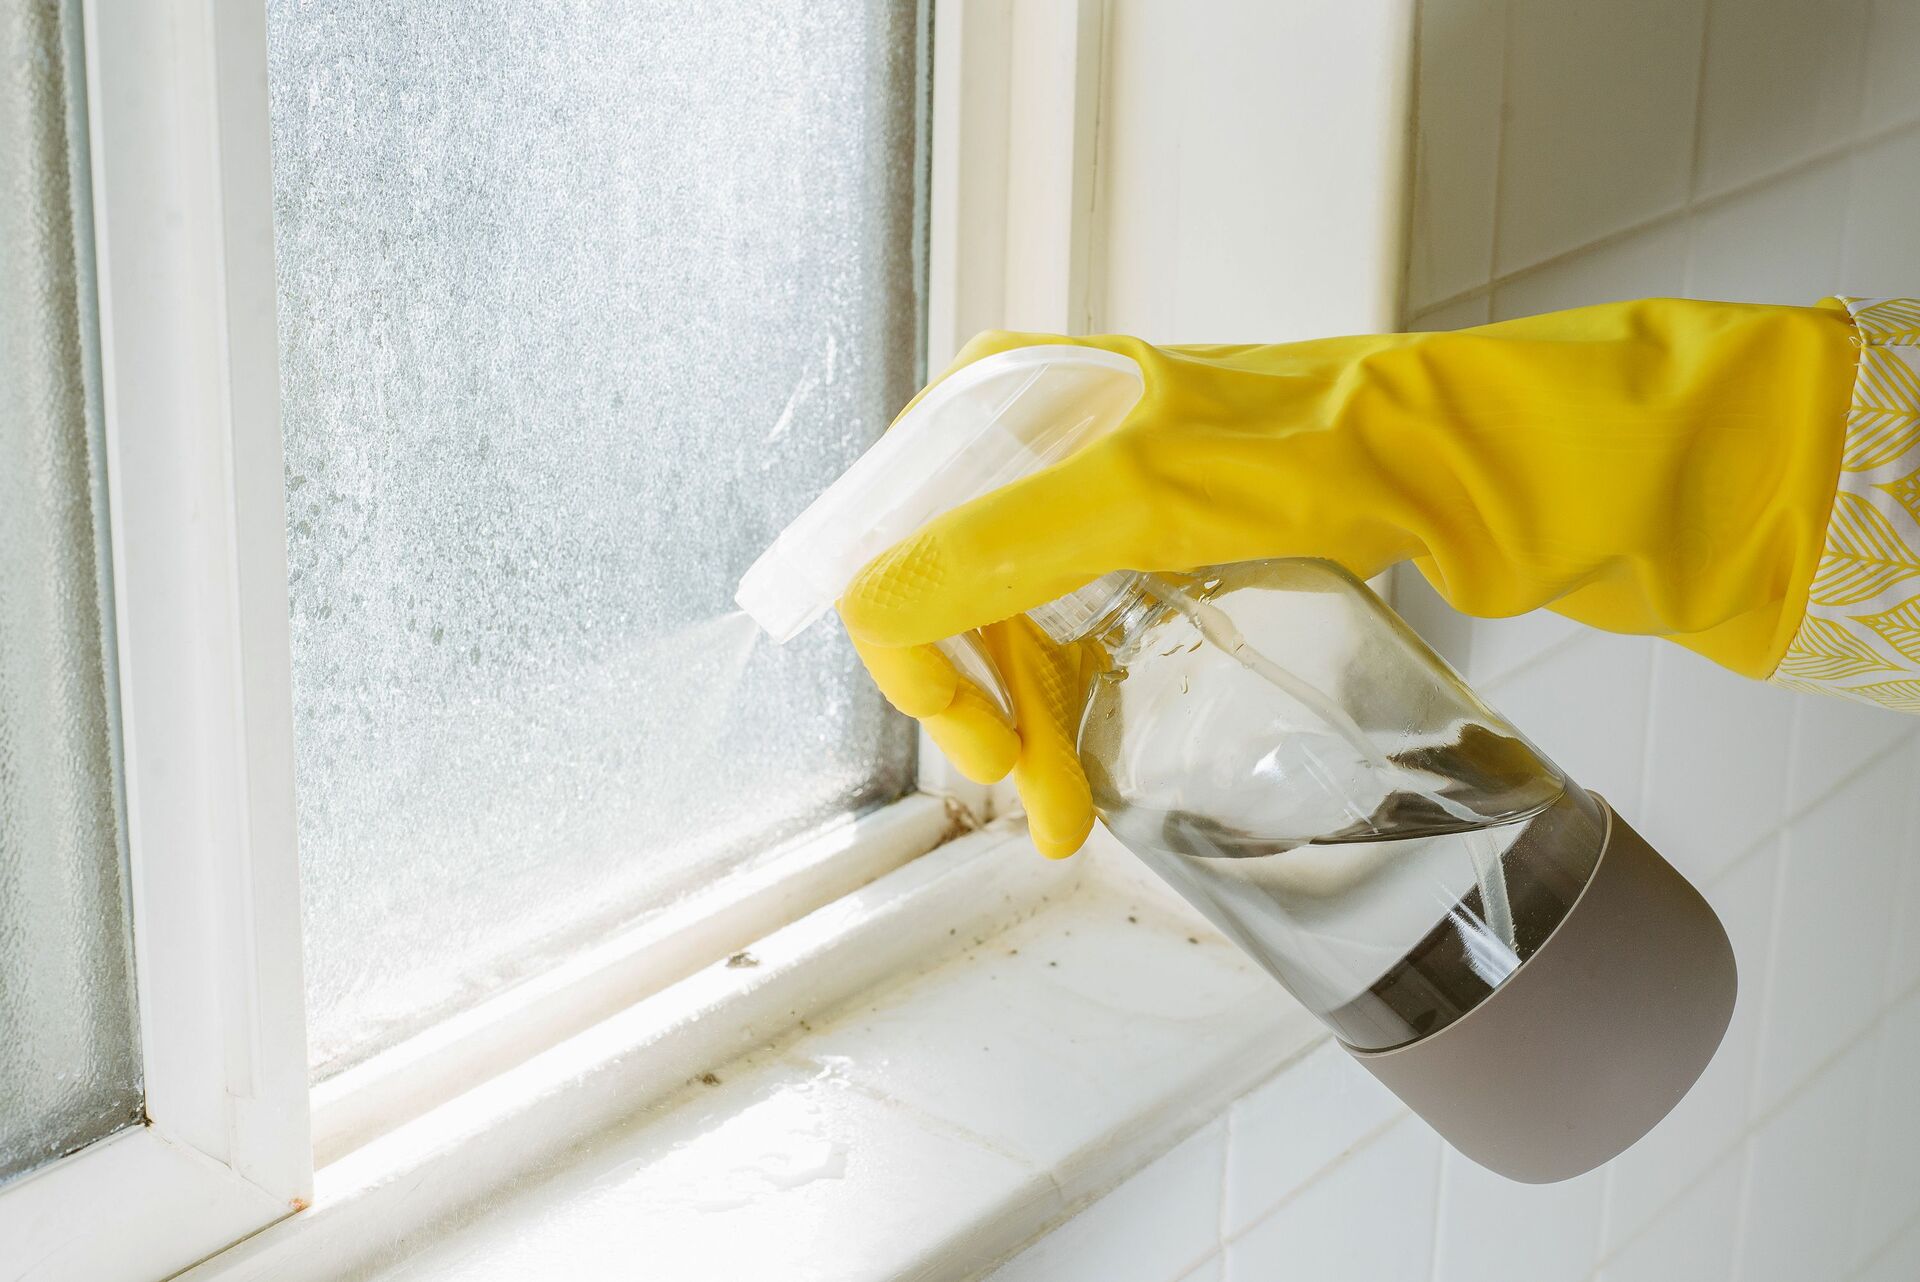 Using Bleach To Kill Mold: What You Need To Know